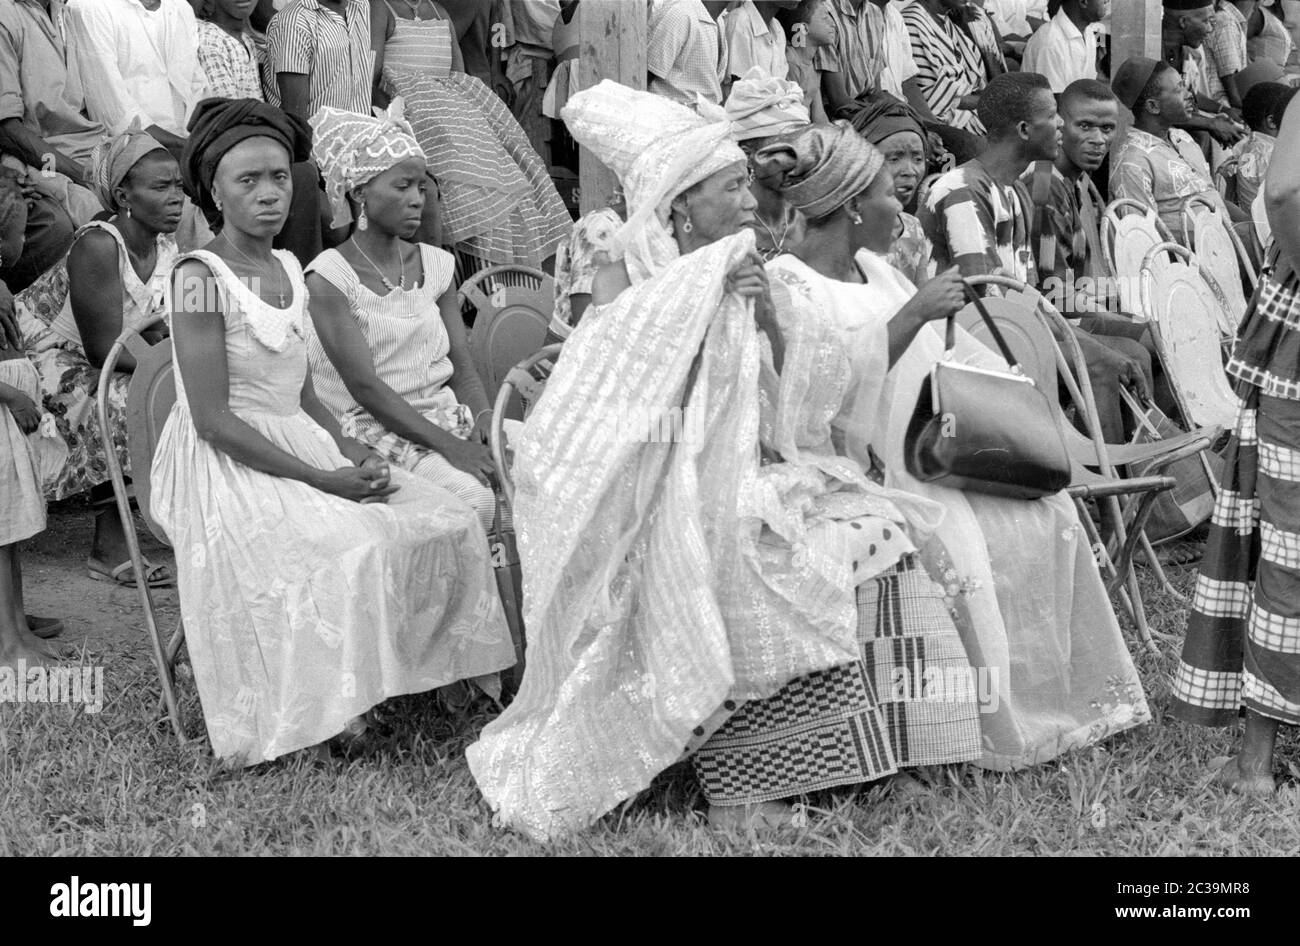 Festively dressed women and men at a festival in Sierra Leone. Stock Photo